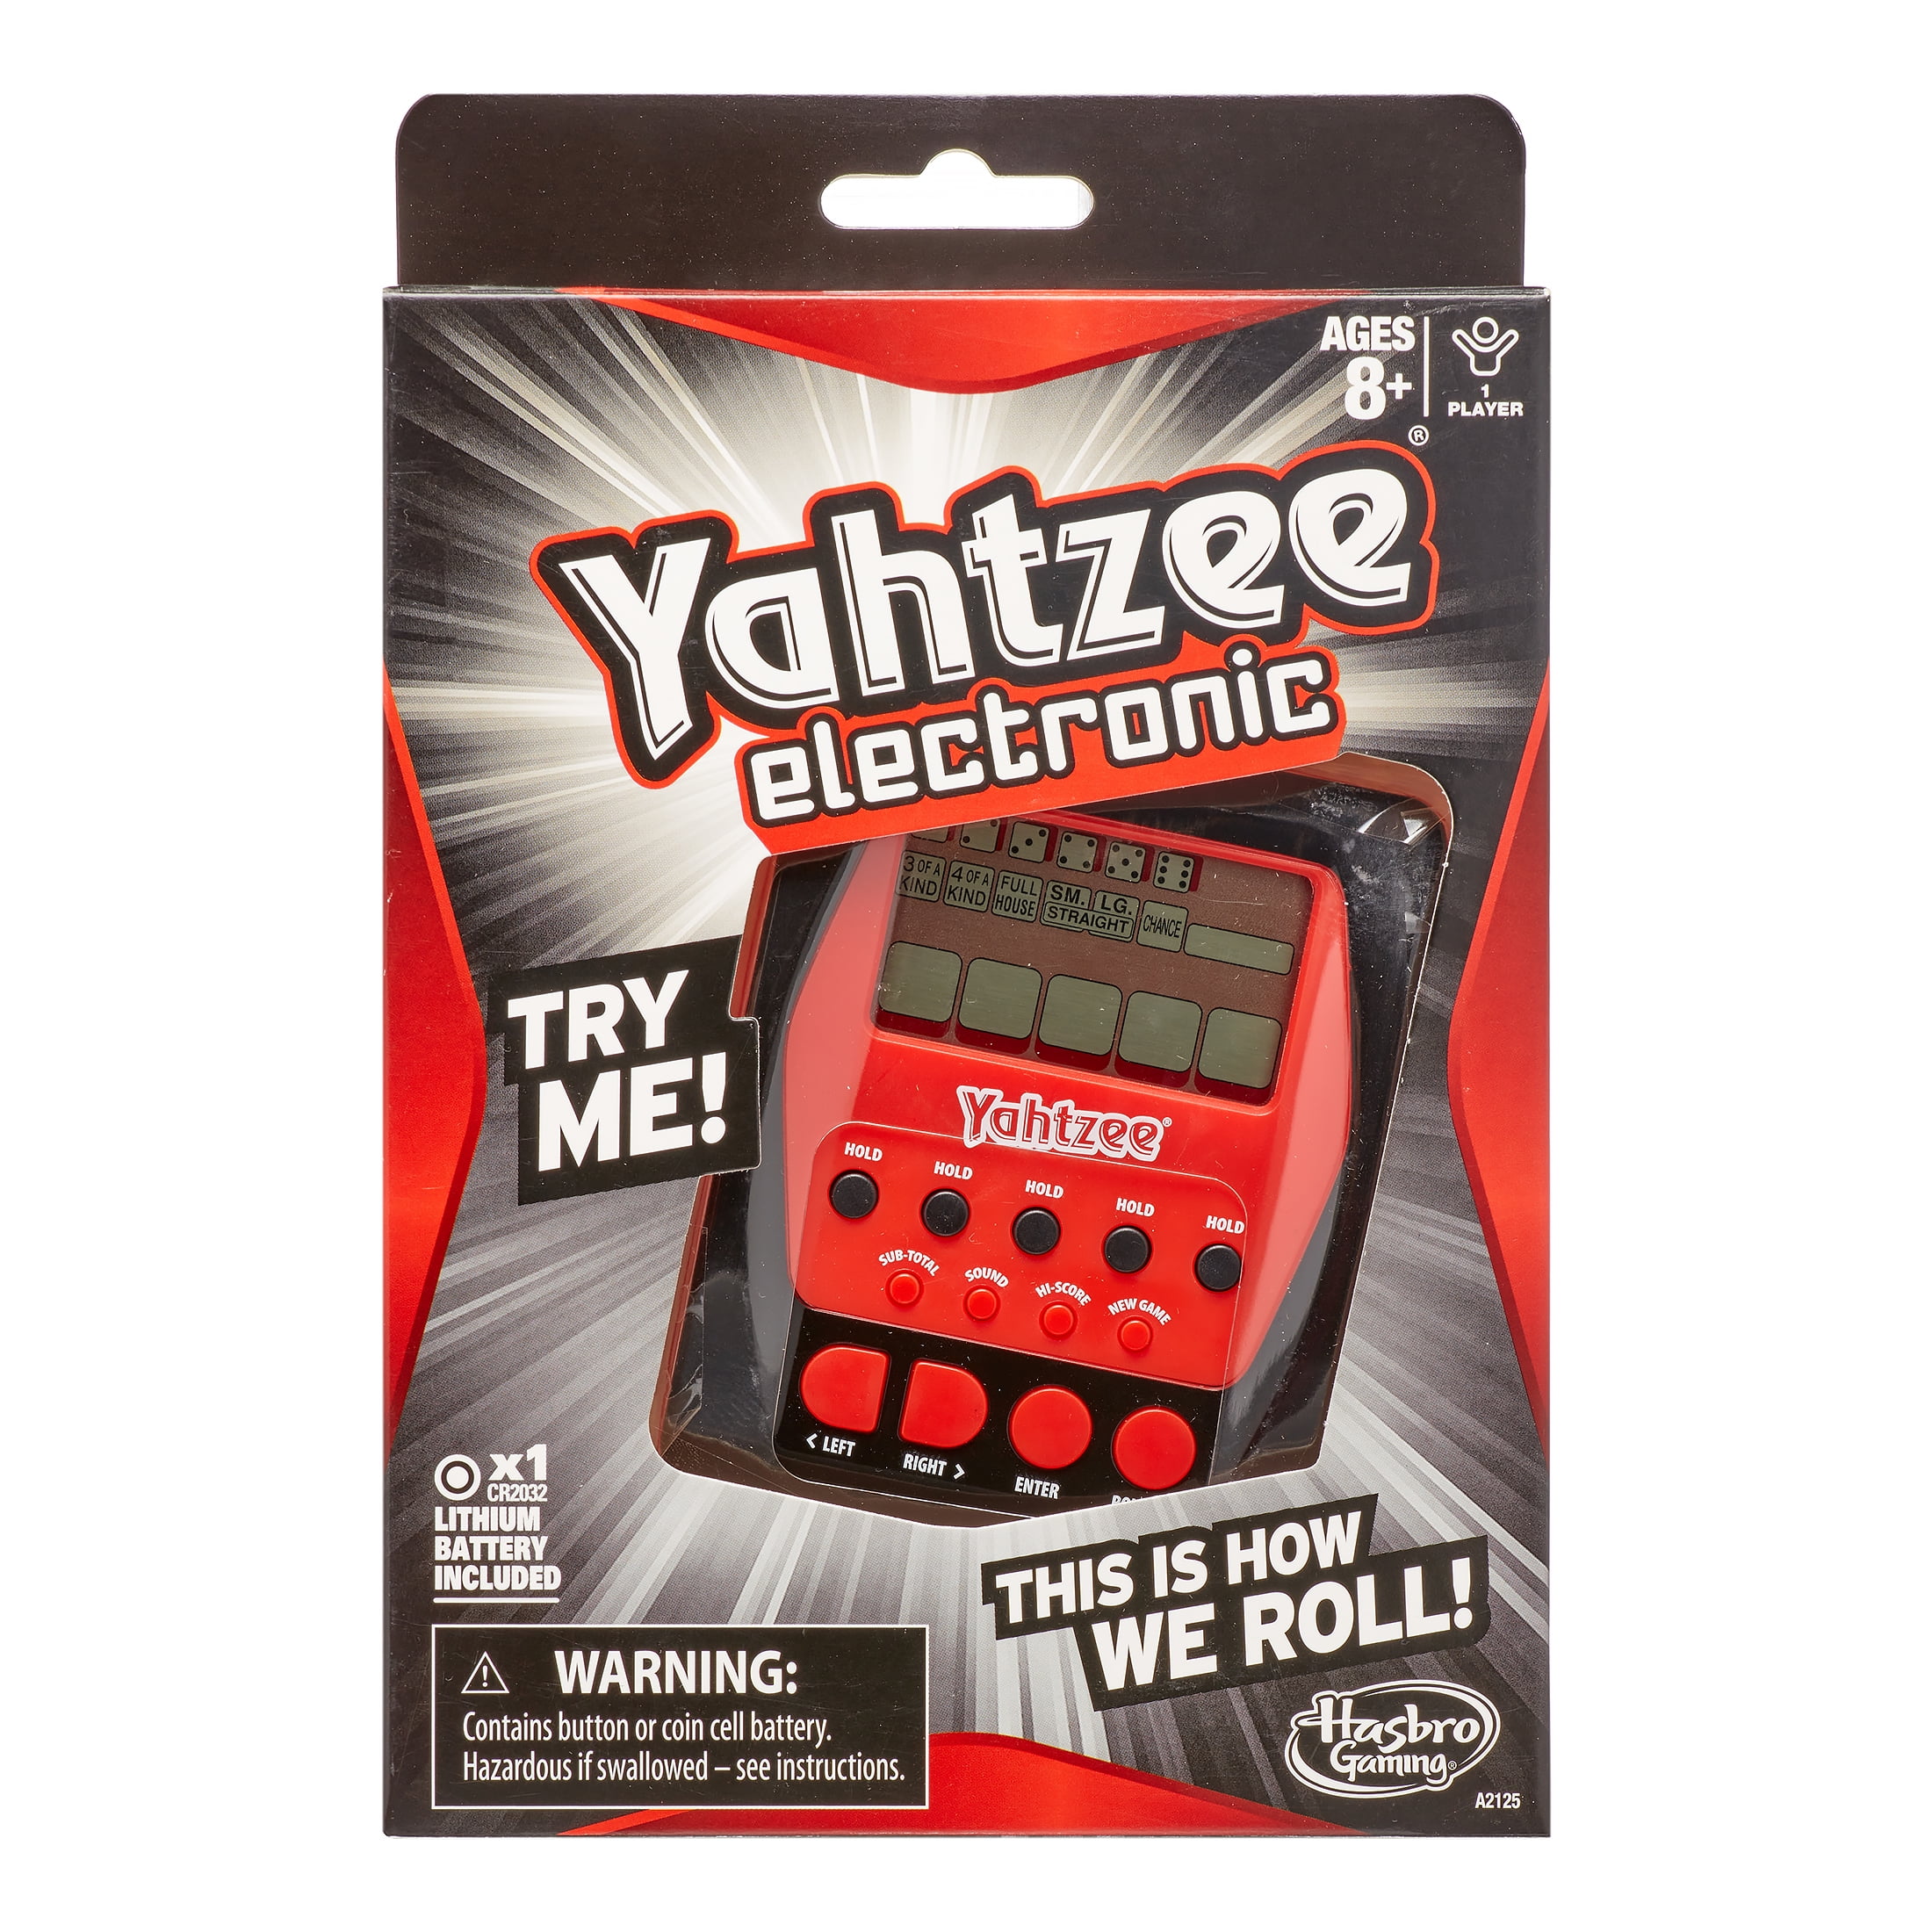 Yahtzee Electronic Portable Handheld Game Hasbro Parker Brothers New Dice Game 